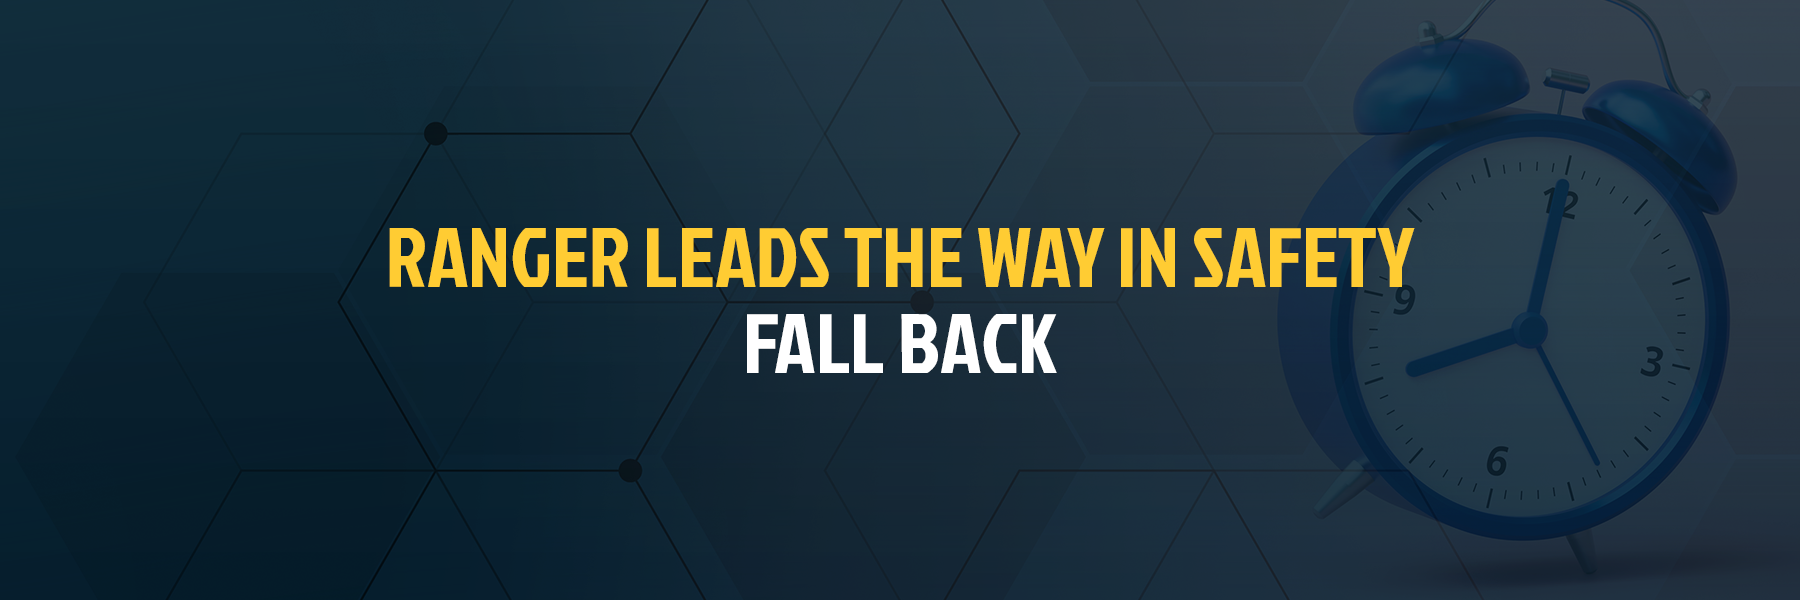 Ranger Leads the Way in Safety - Fall Back